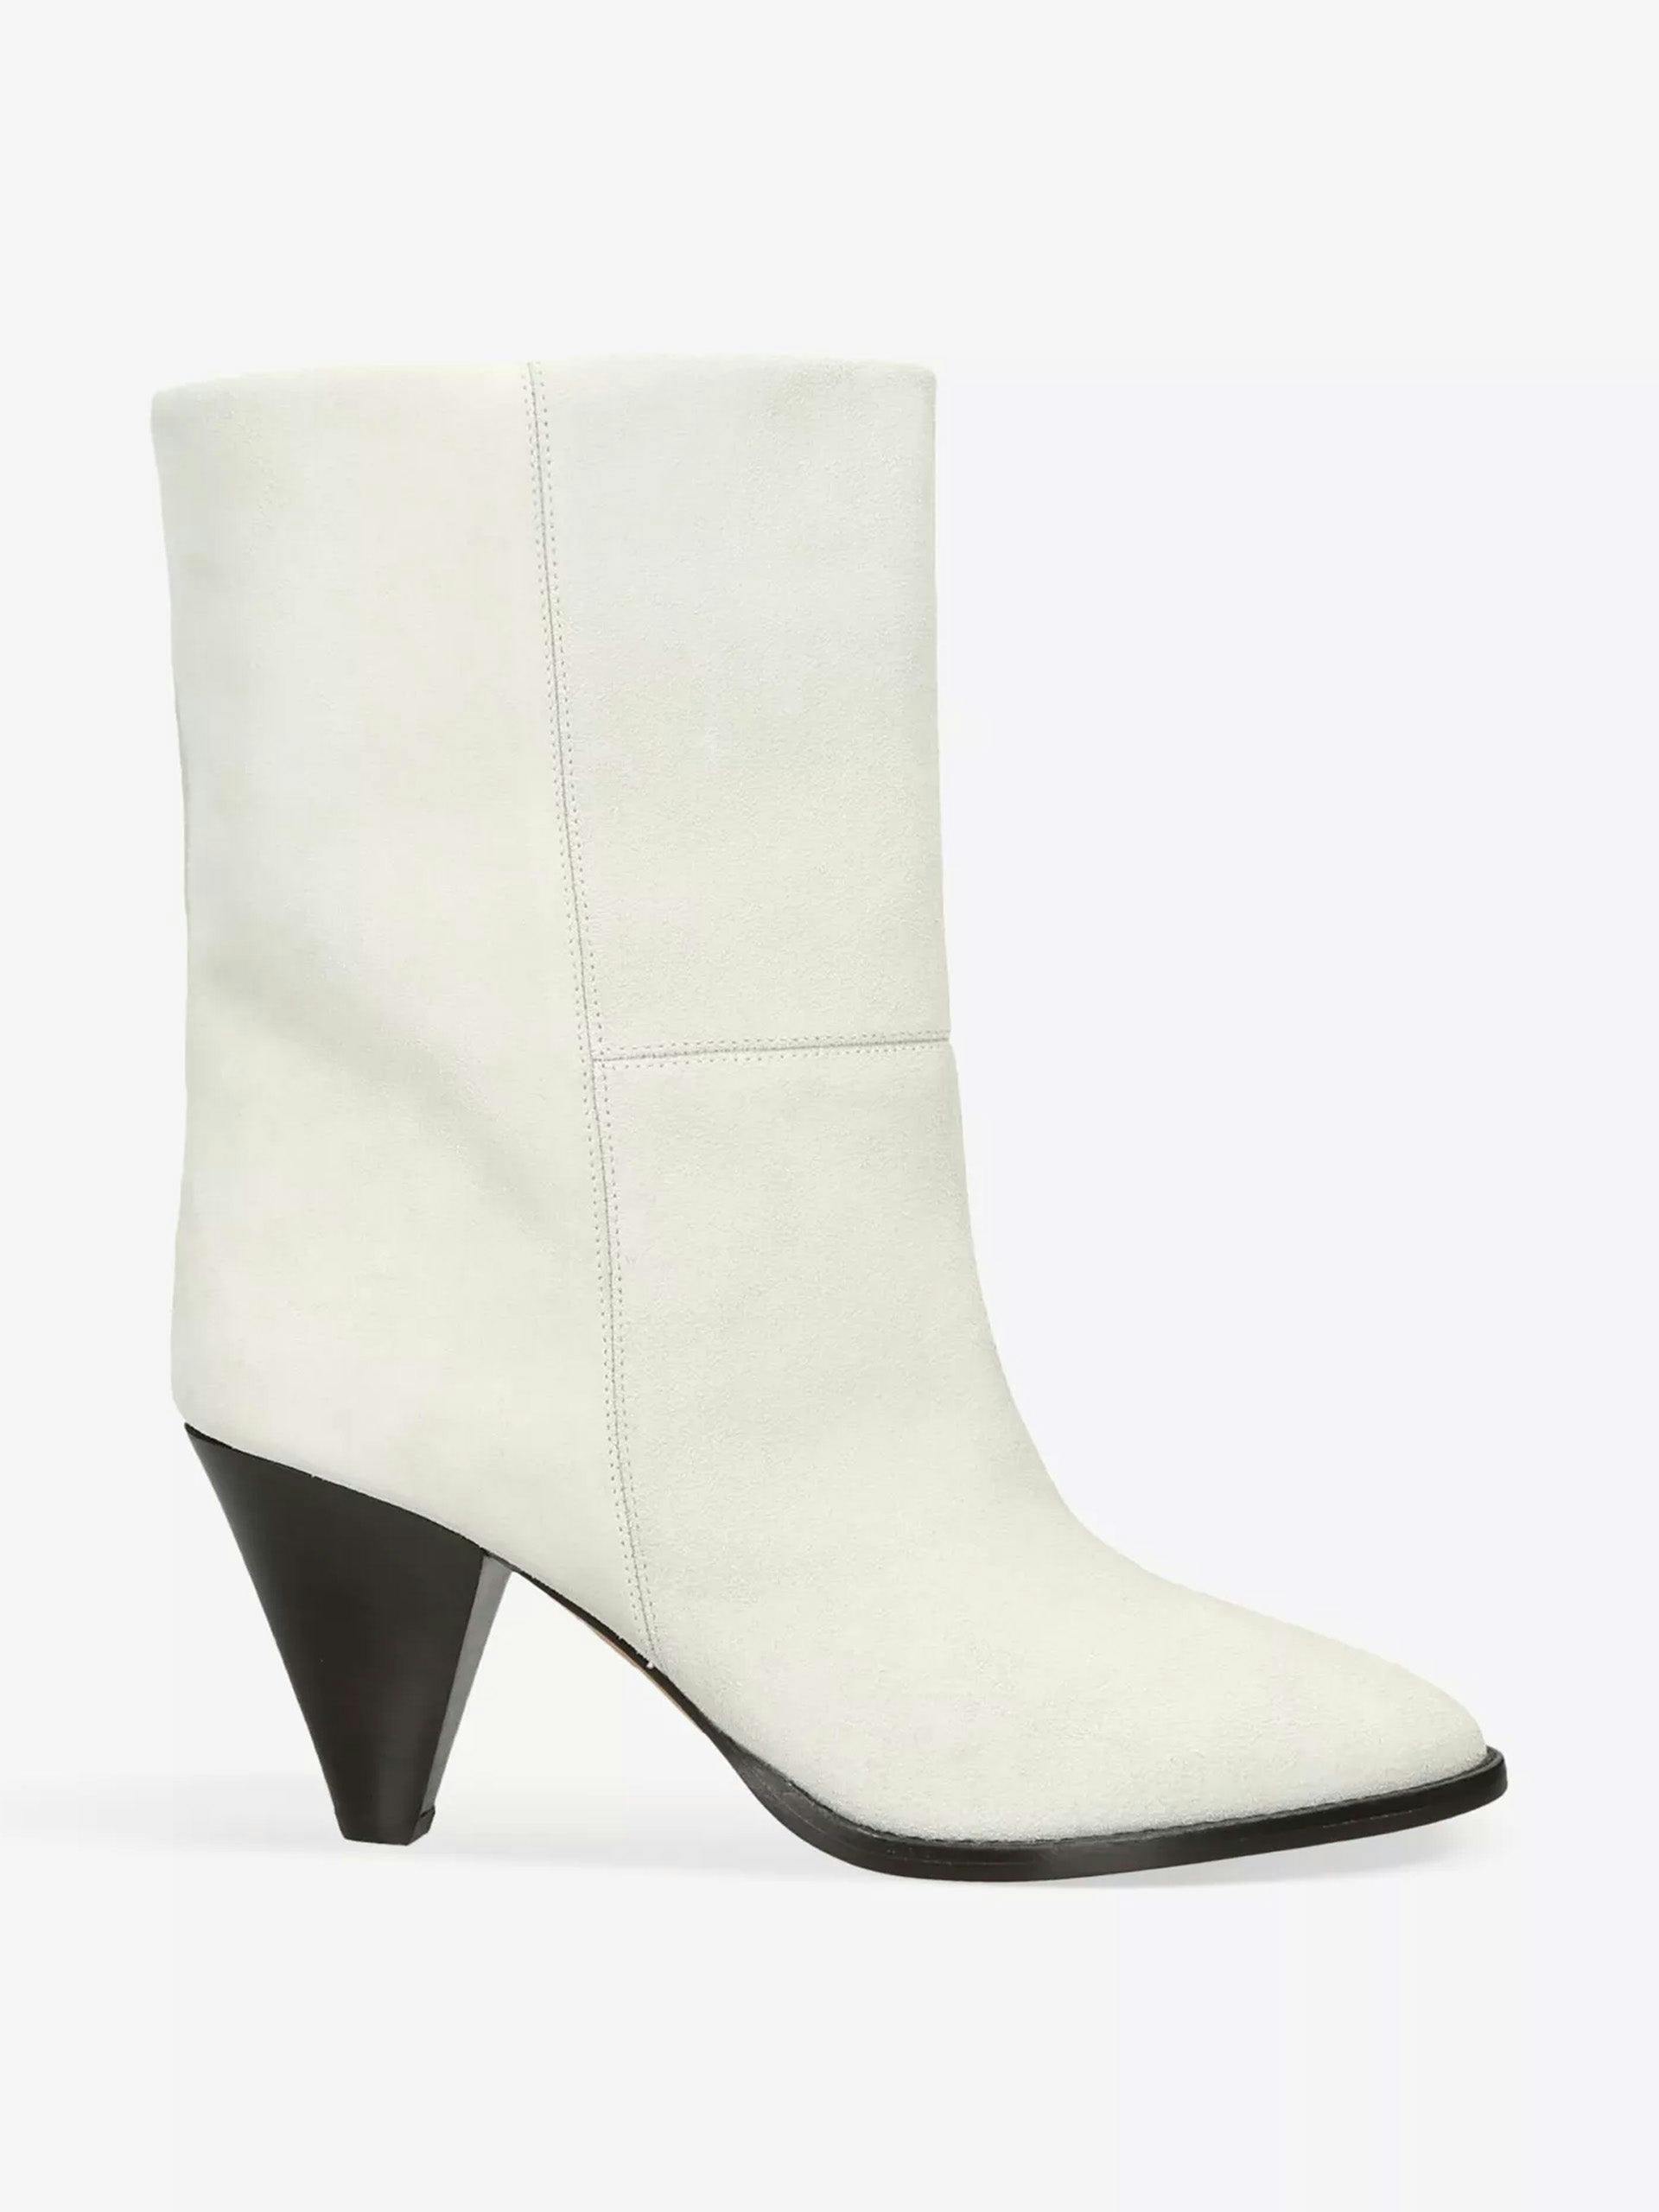 Rouxa contrast-sole suede heeled ankle boots